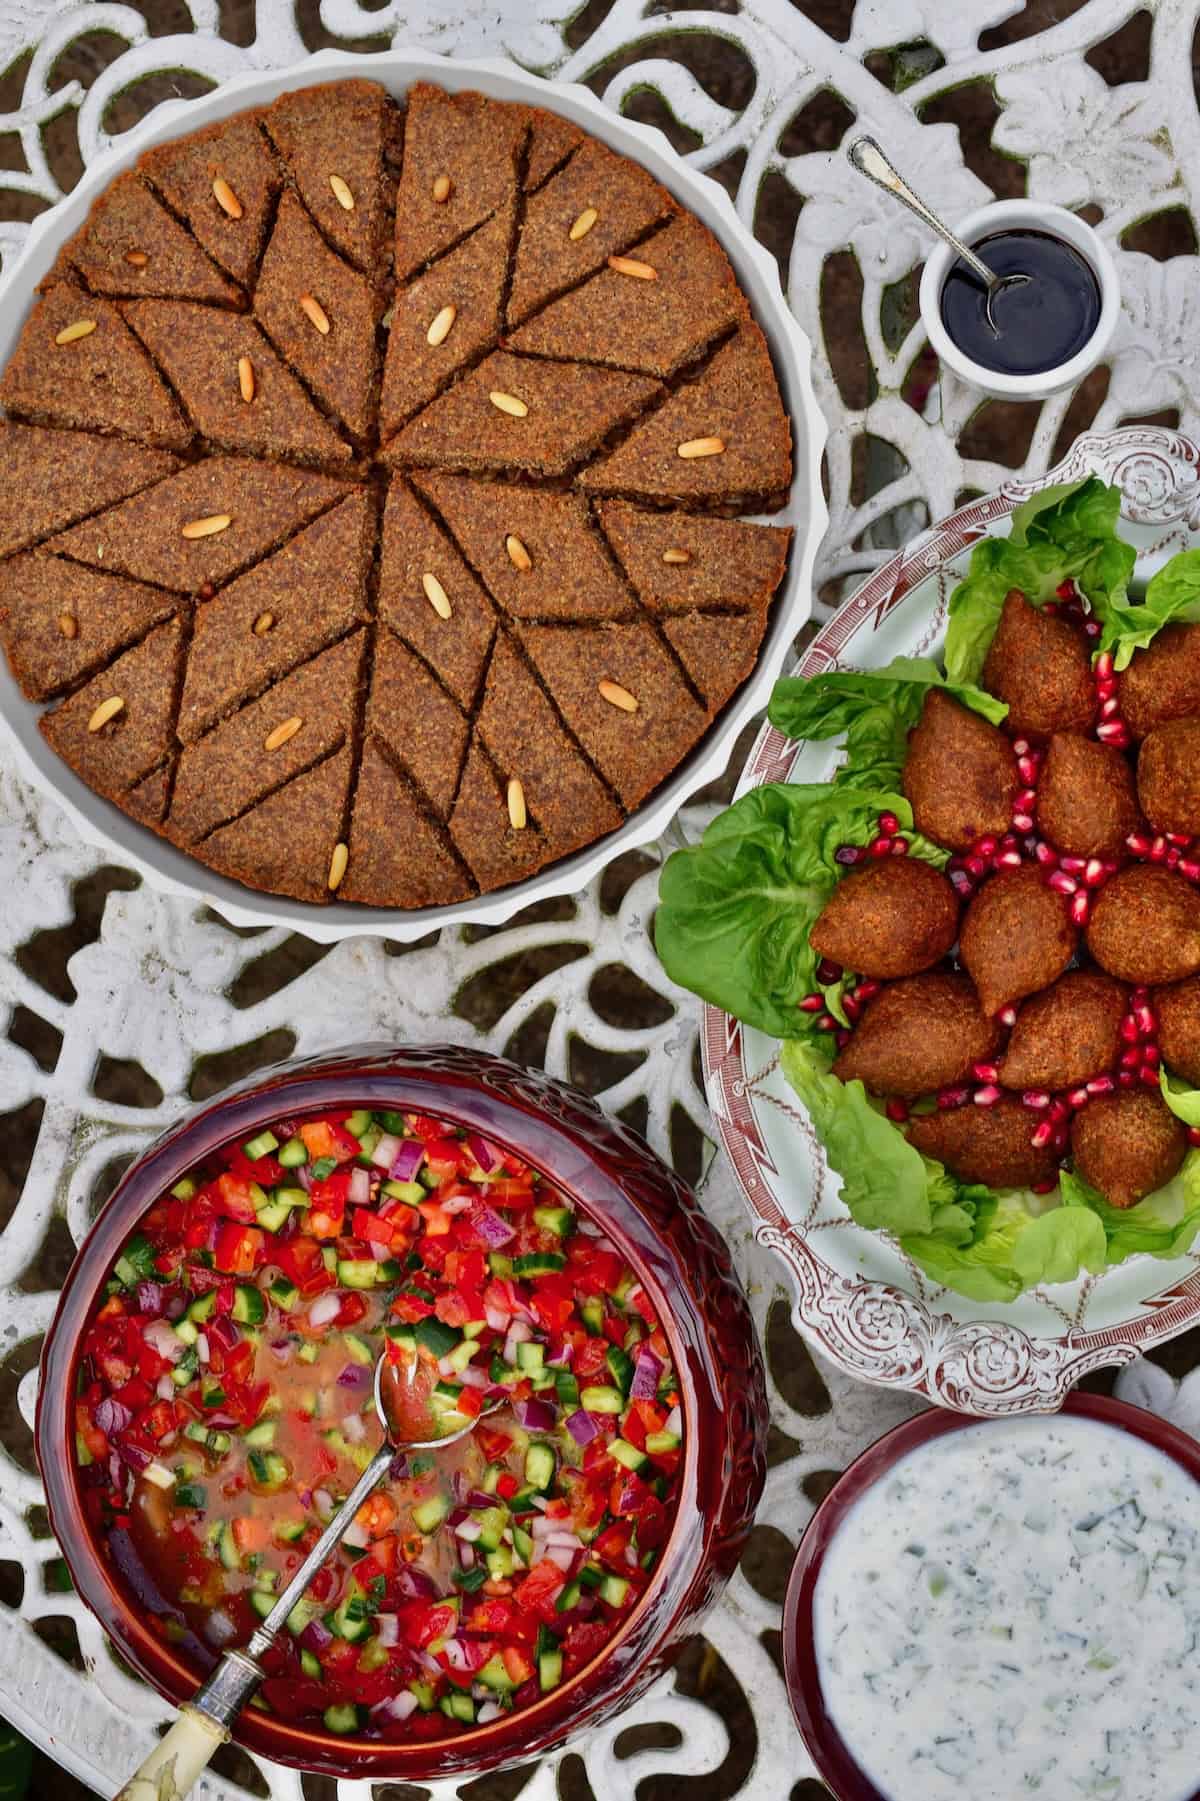 Fried and baked kibbeh next to salads